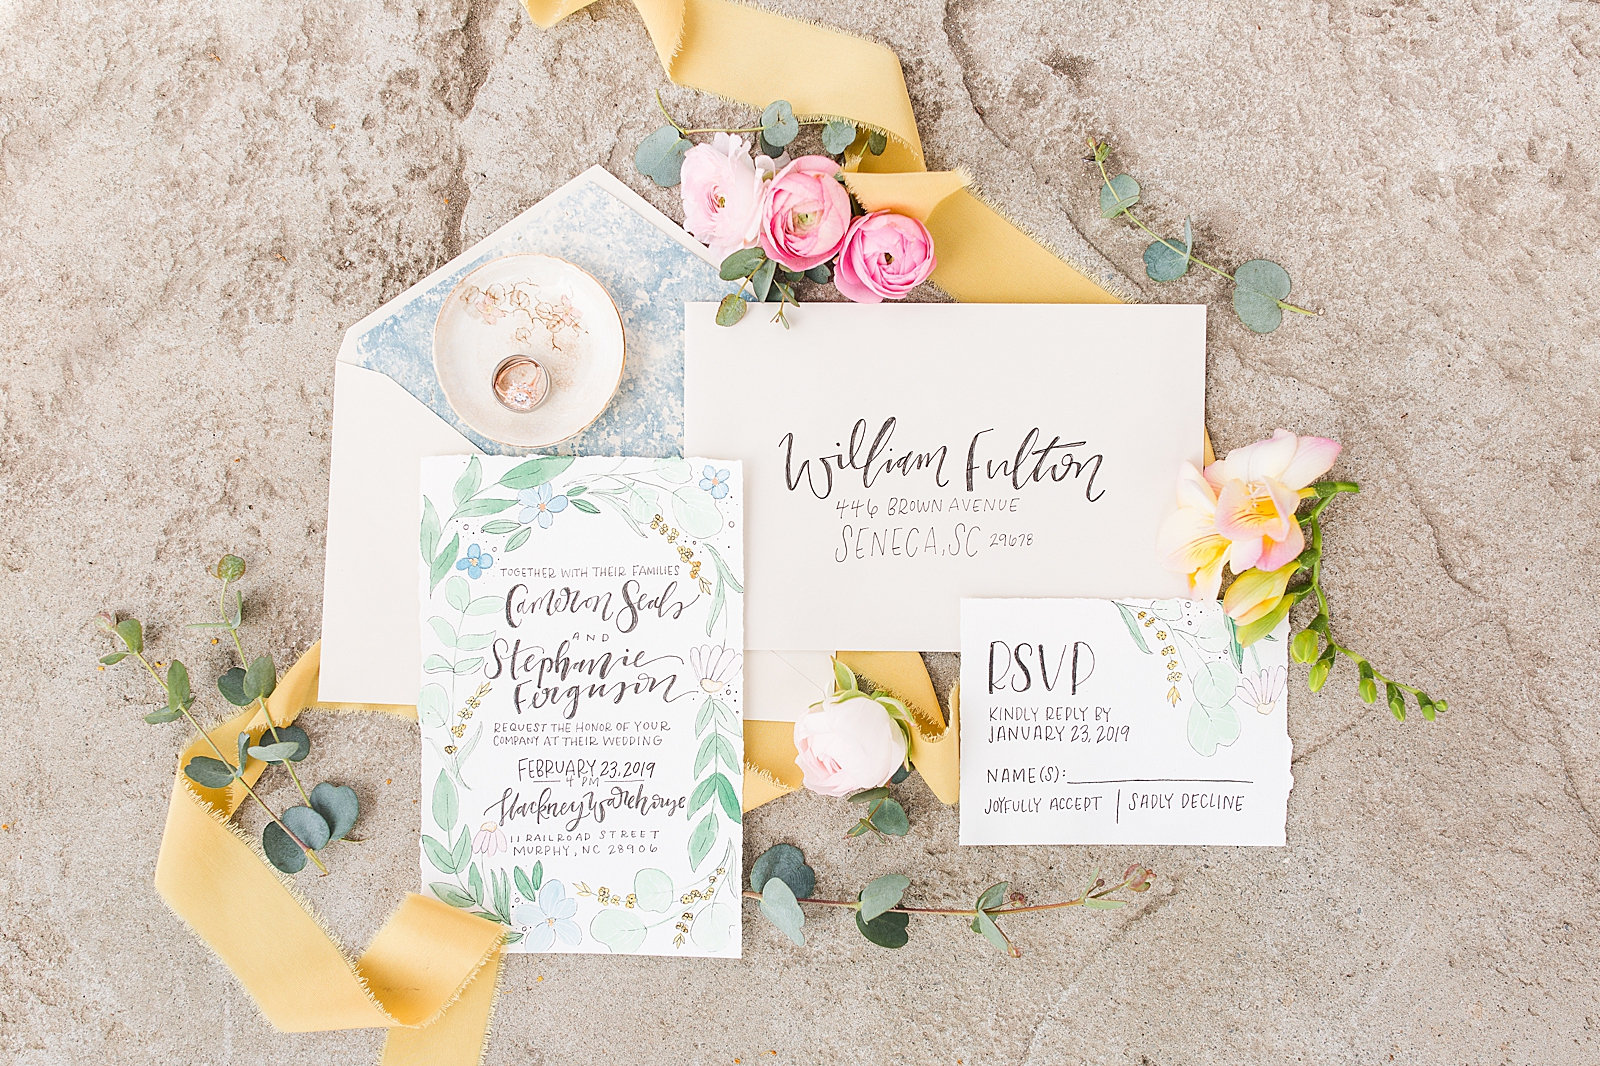 Hackney Warehouse Wedding Invitation Suite with Rings in Ring Dish Yellow Ribbon and Pink Flowers Photo